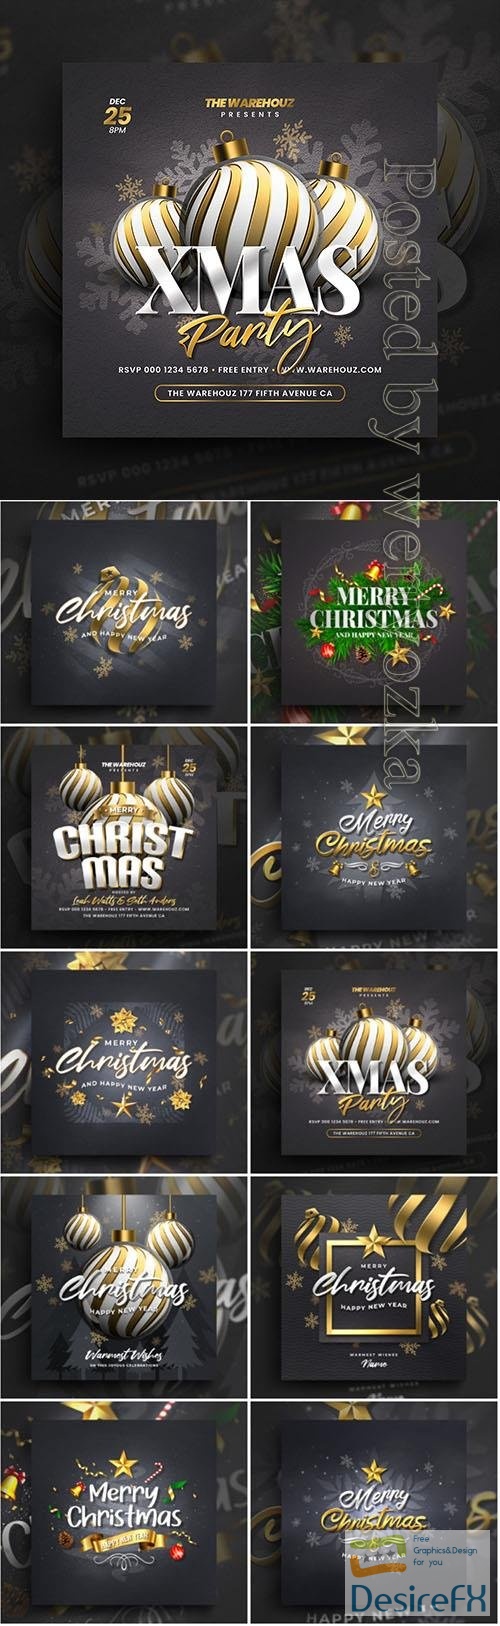 PSD christmas party flyer invitation social media post and web banner